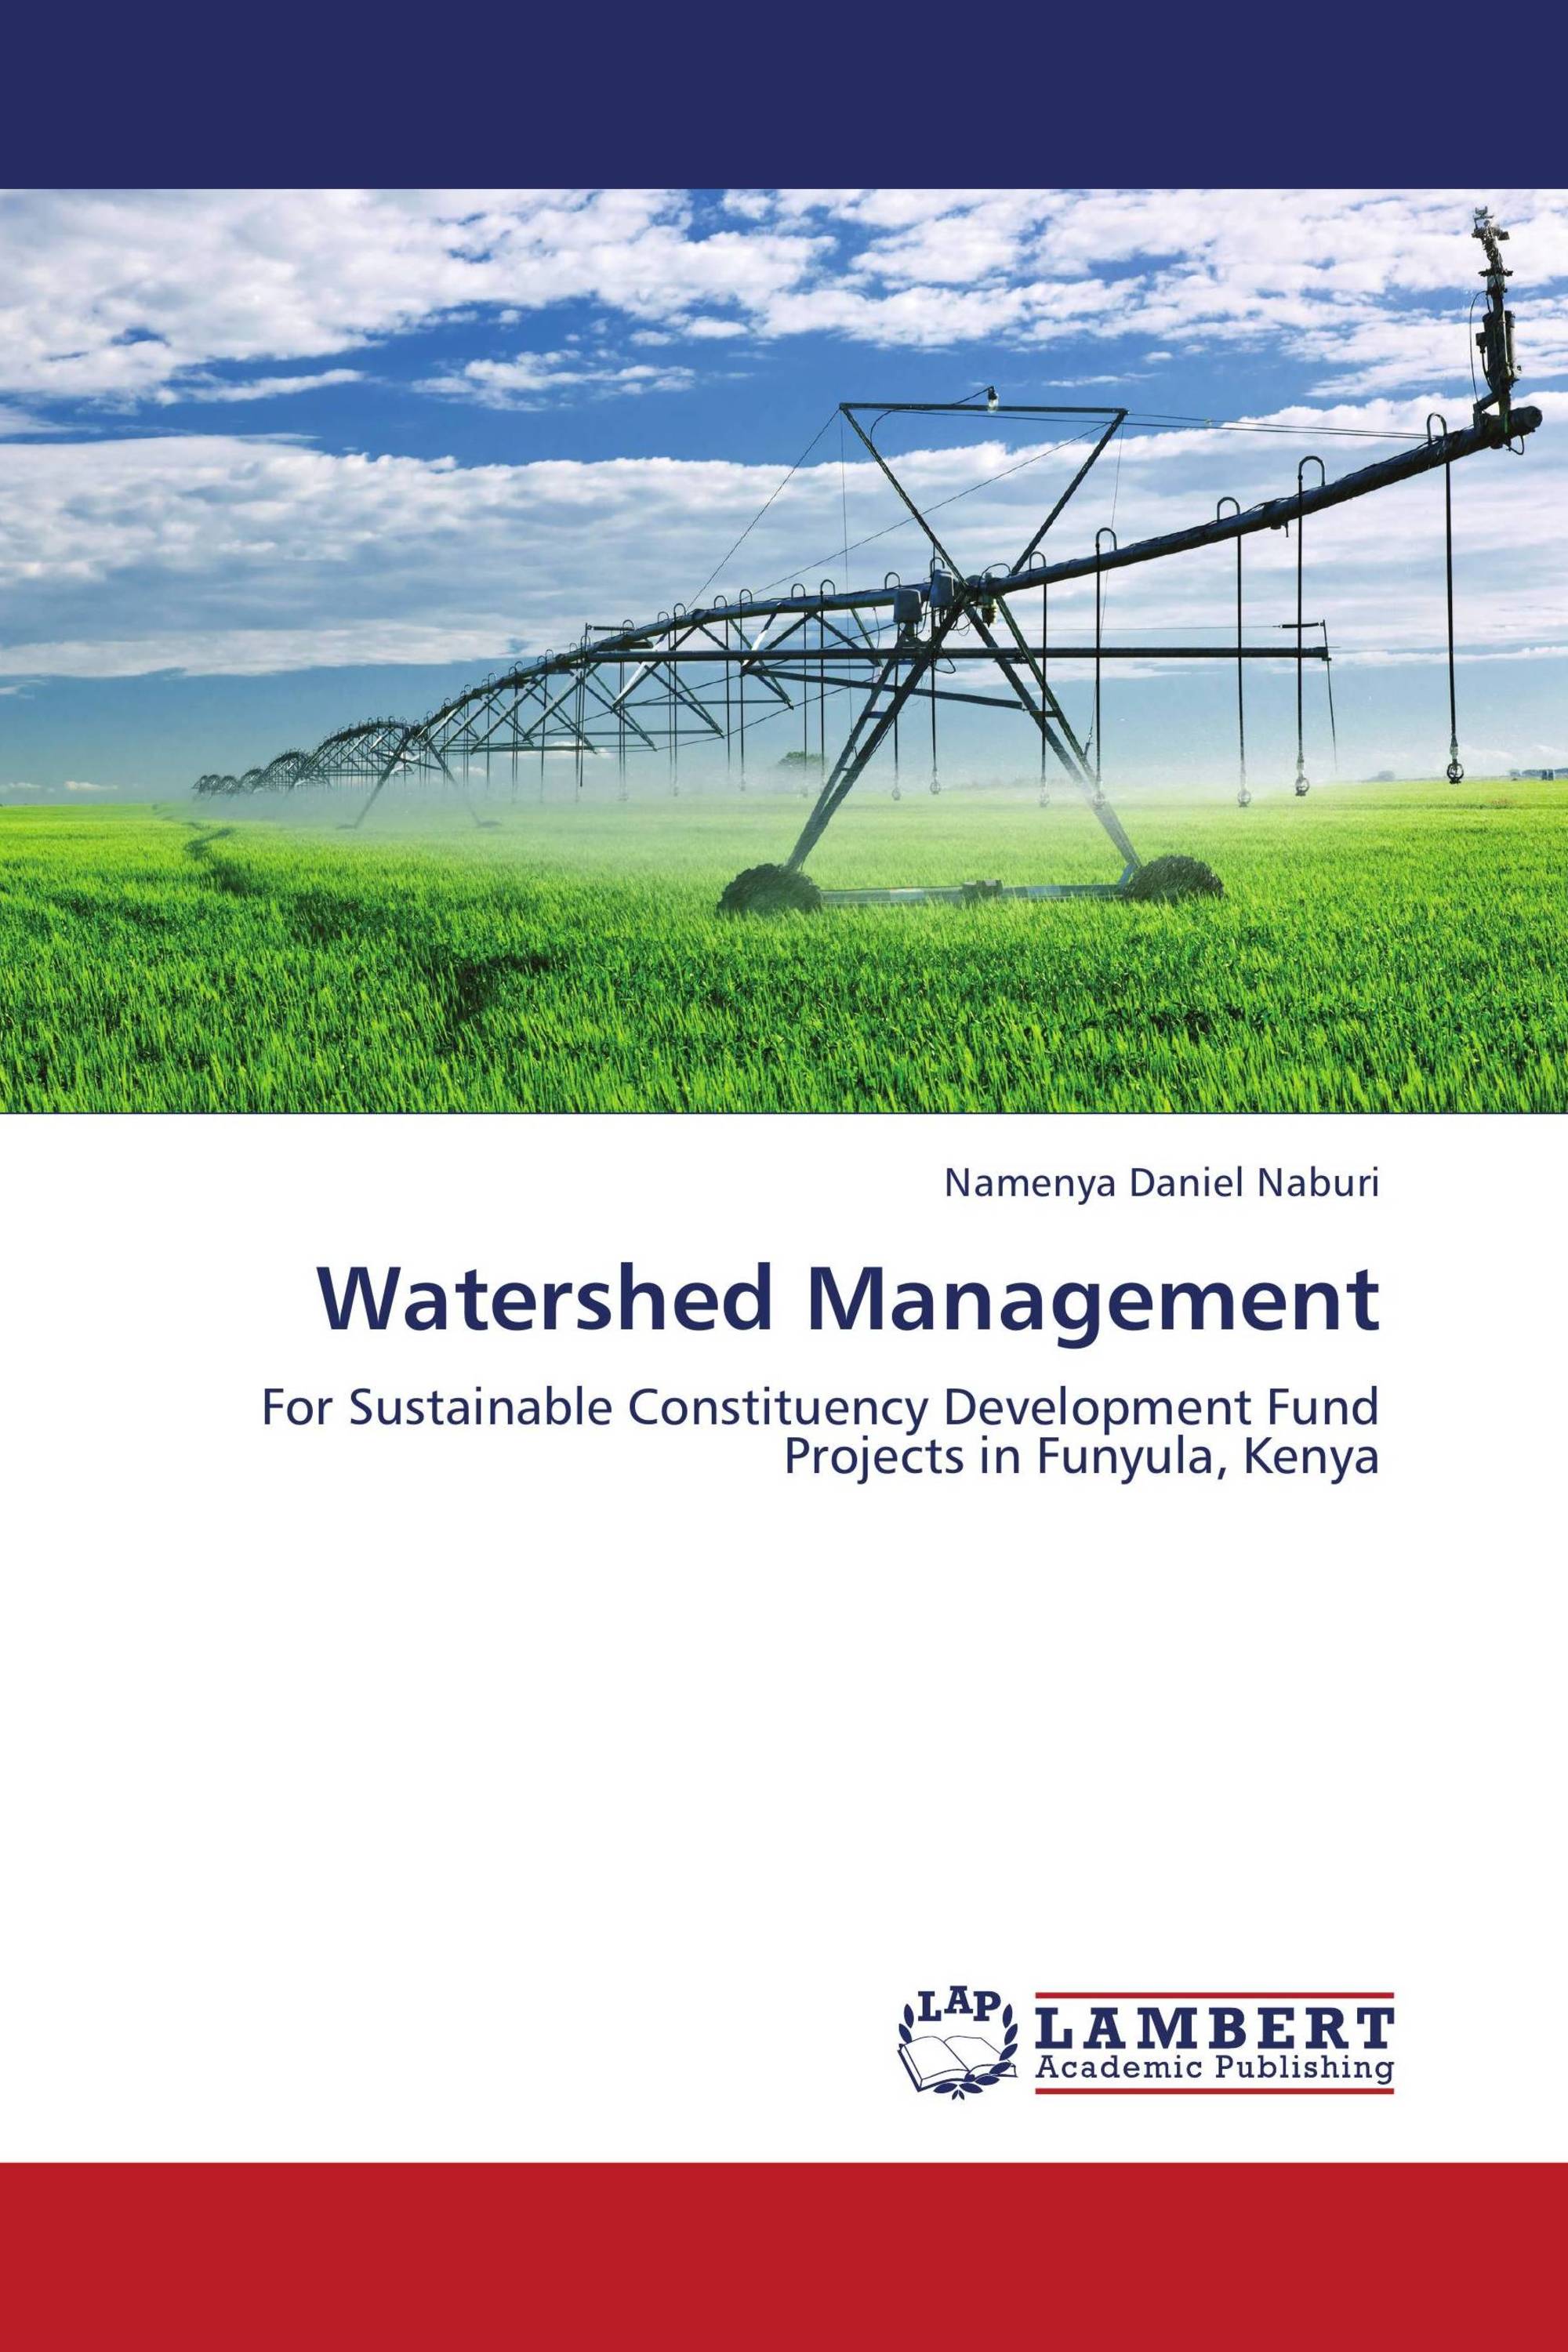 essay about watershed management